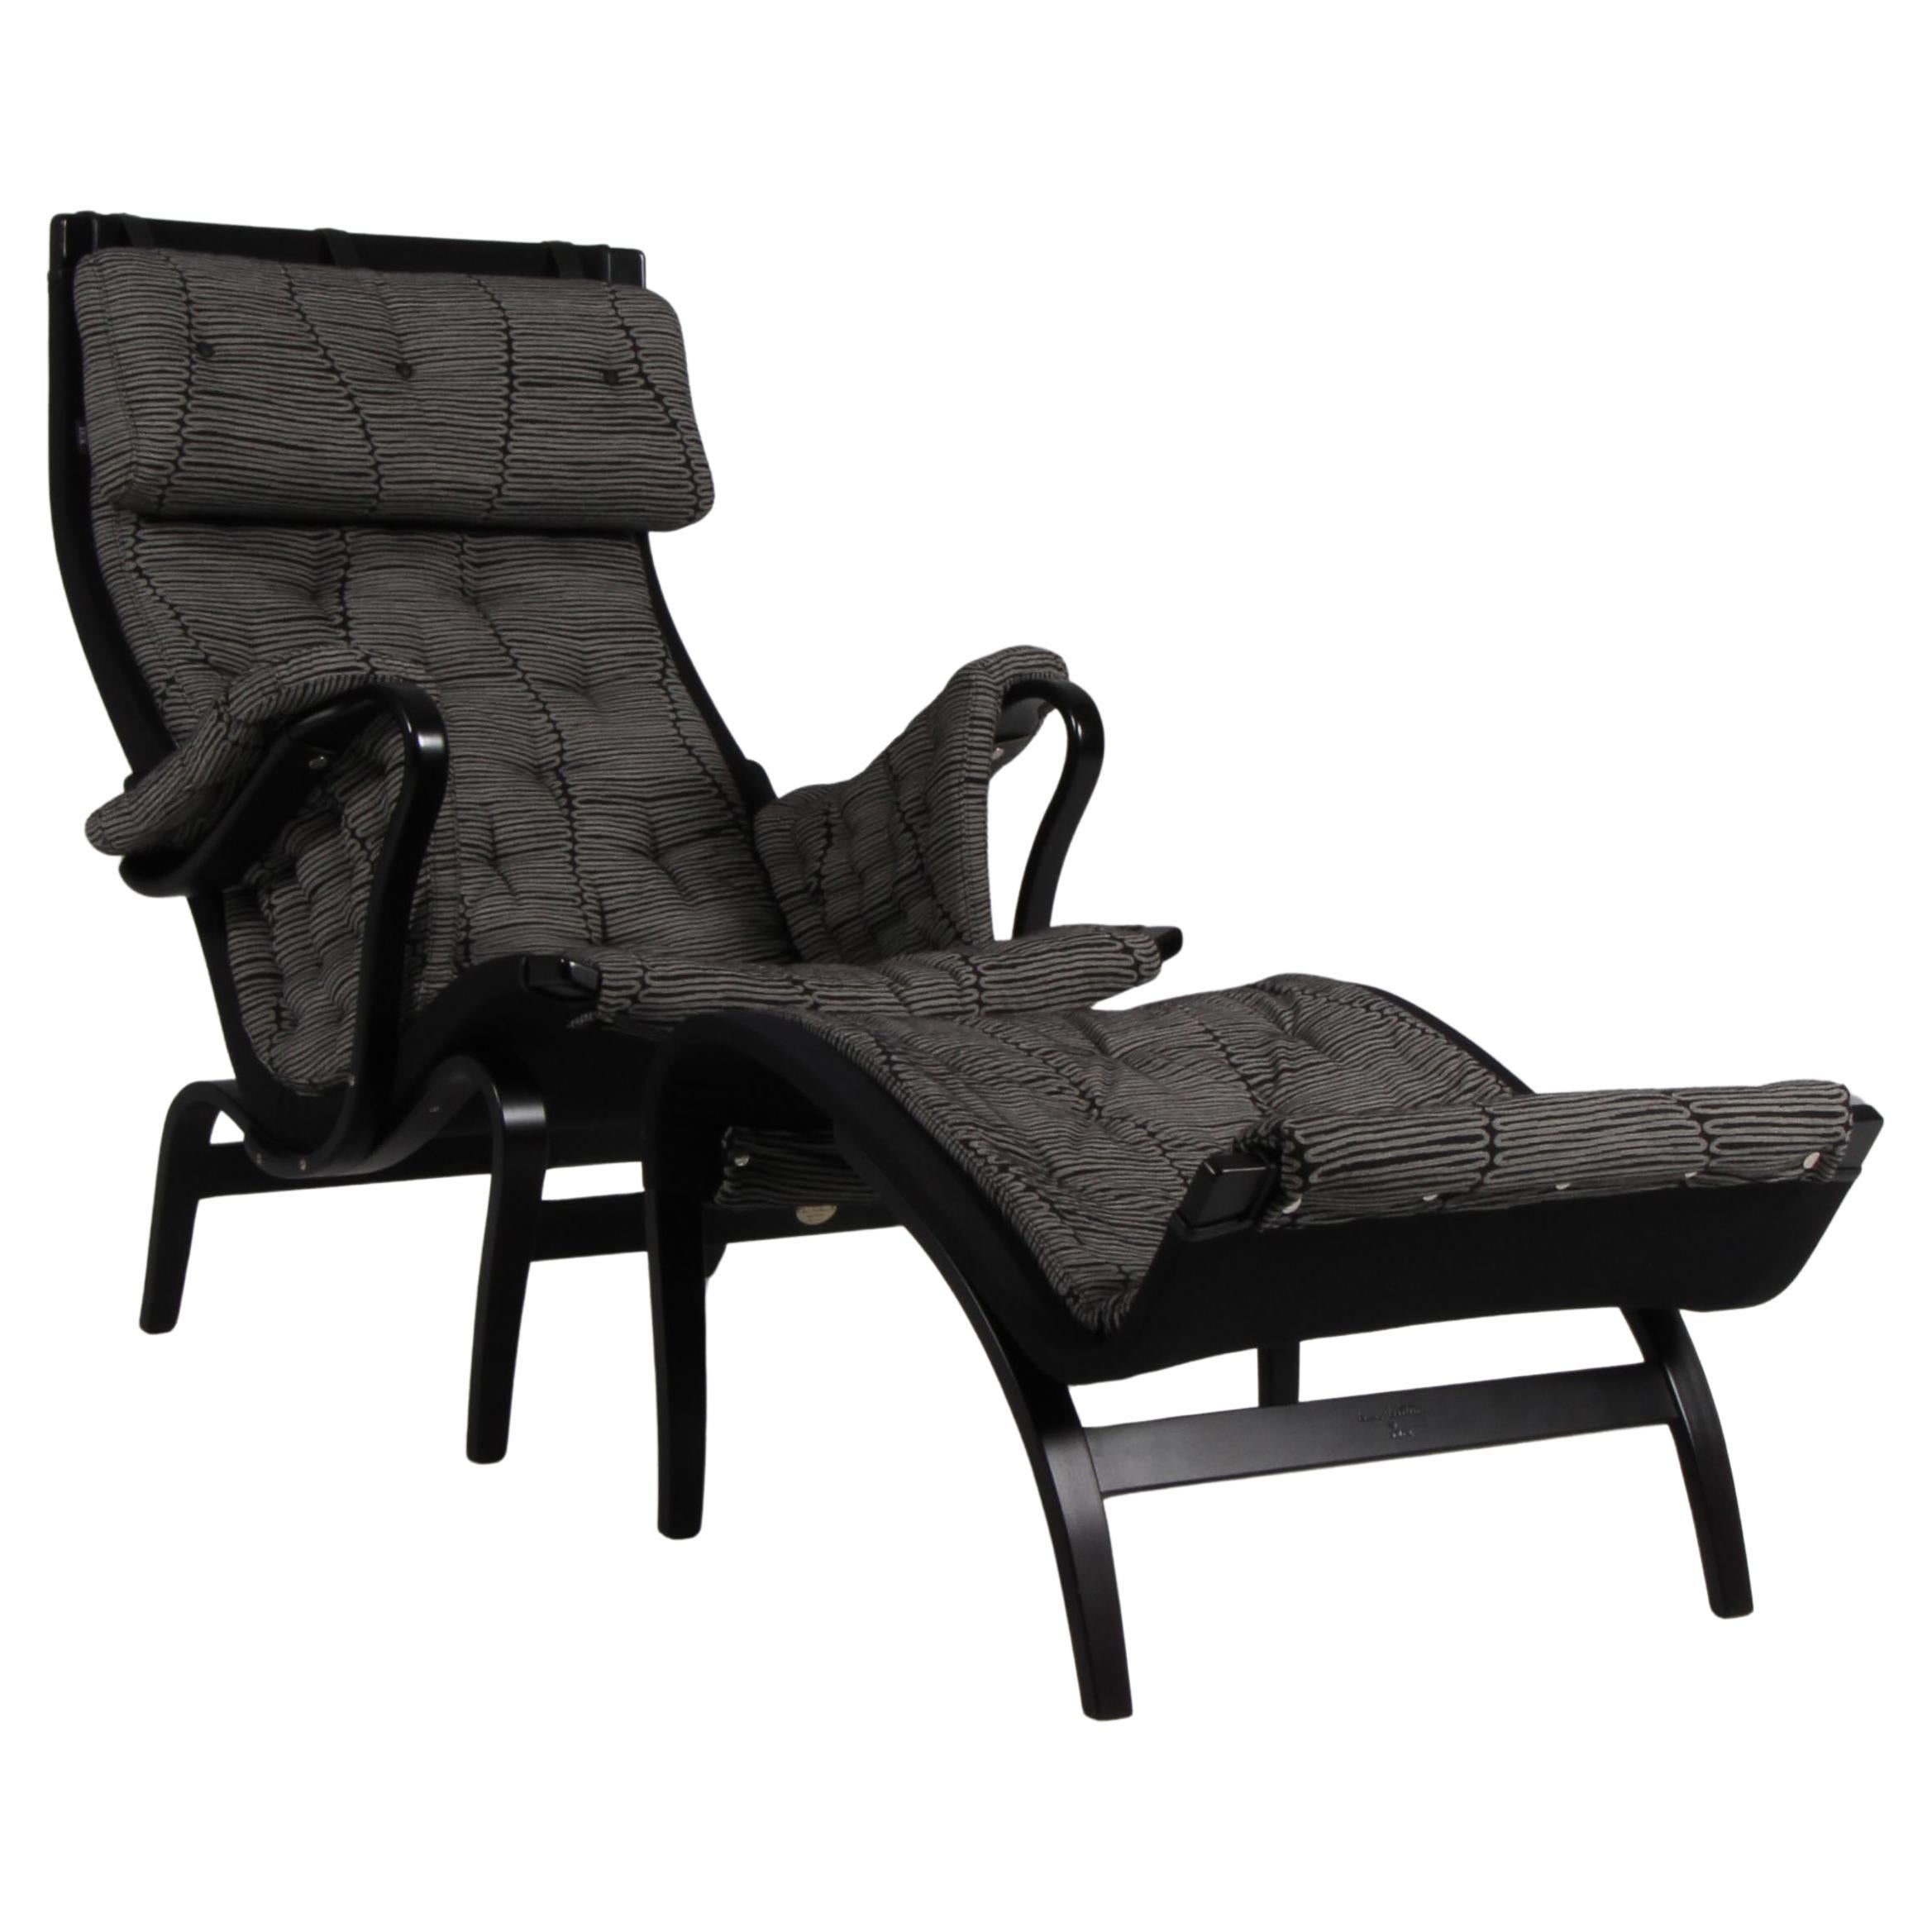 Bruno Mathsson Pernilla Lounge Chair with Ottoman, annivesary edition For Sale